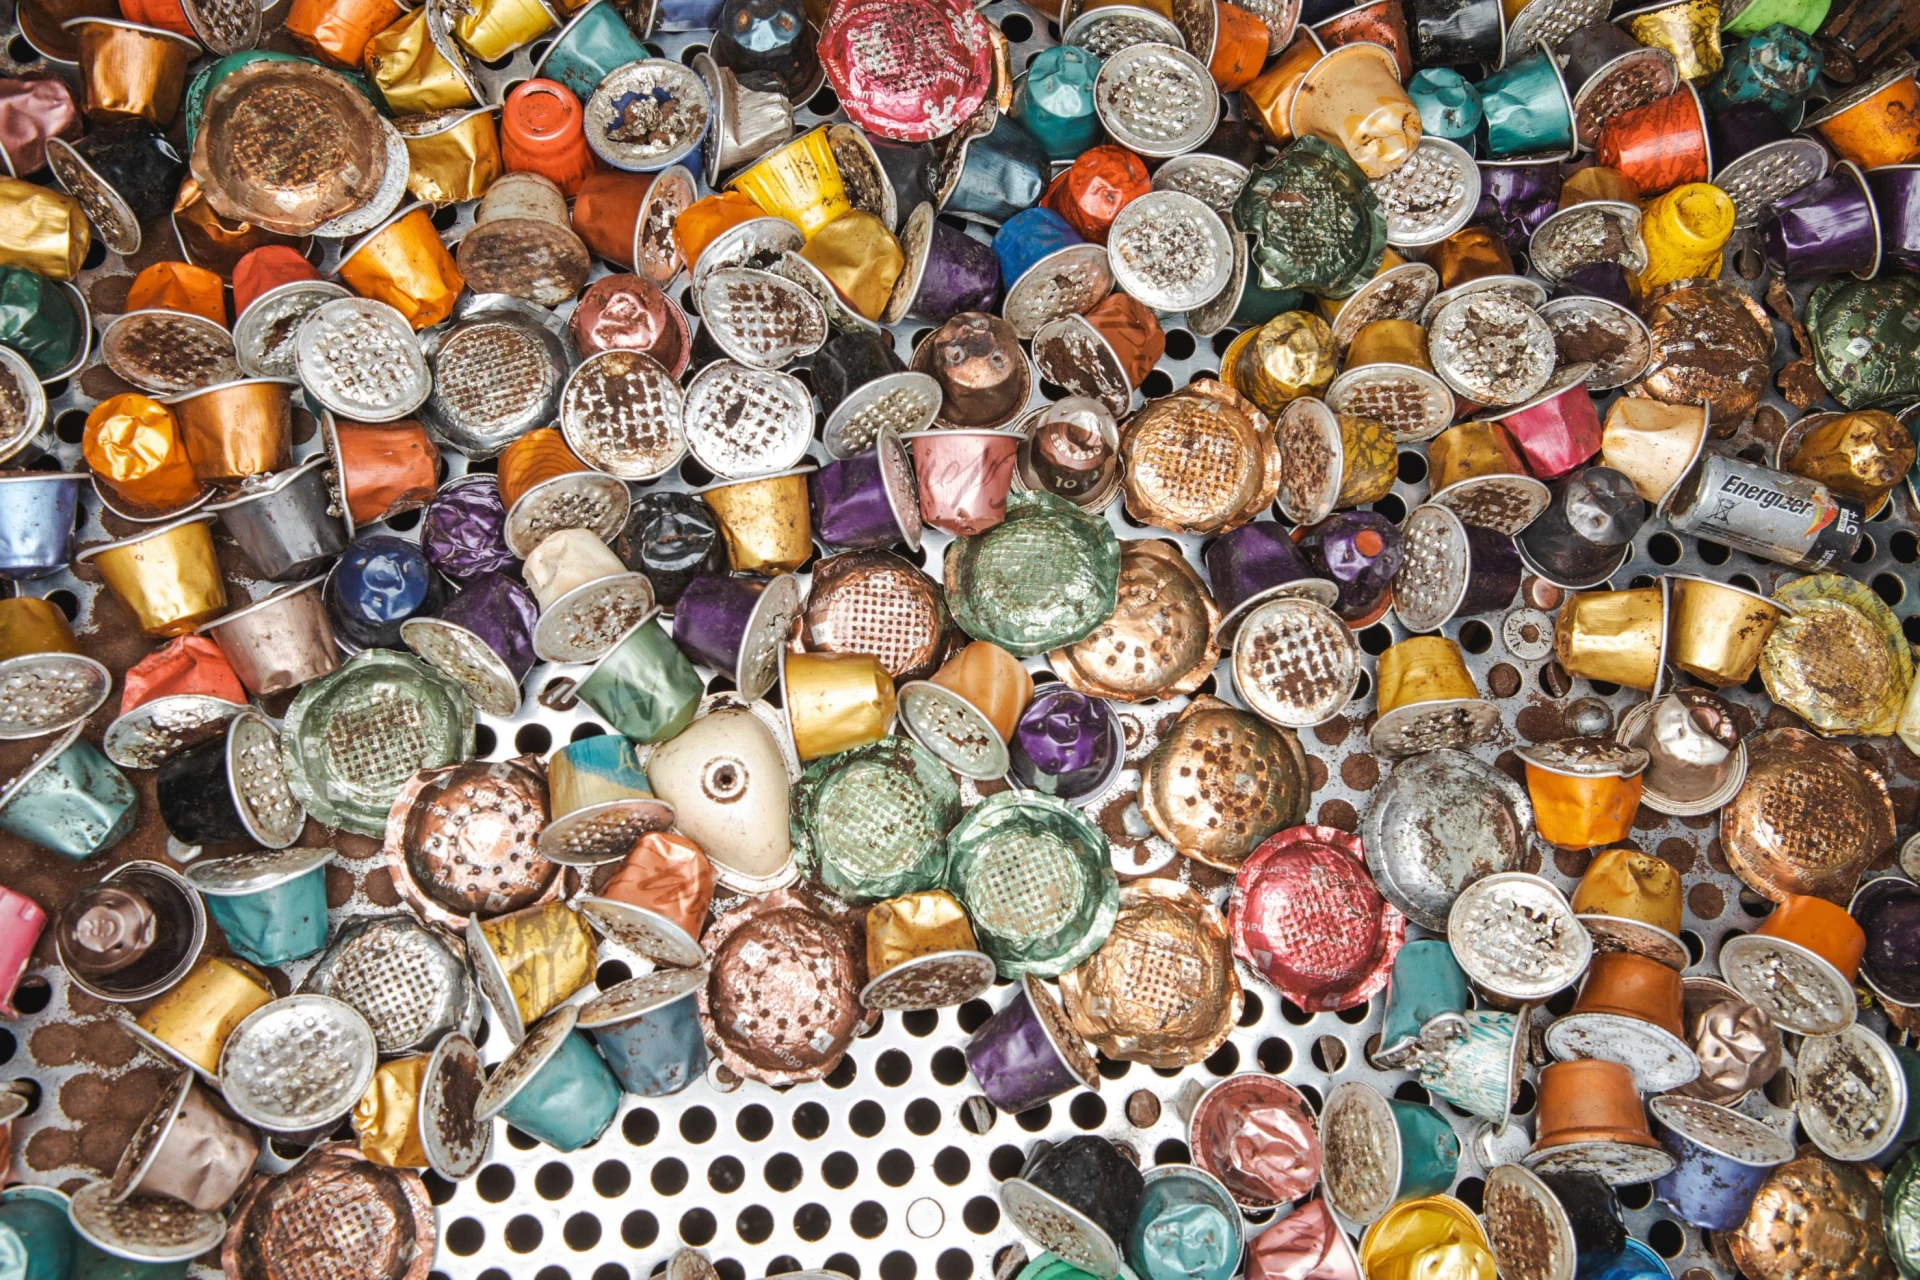 Used coloured capsules are separated from foreign items using a sieve-like device.